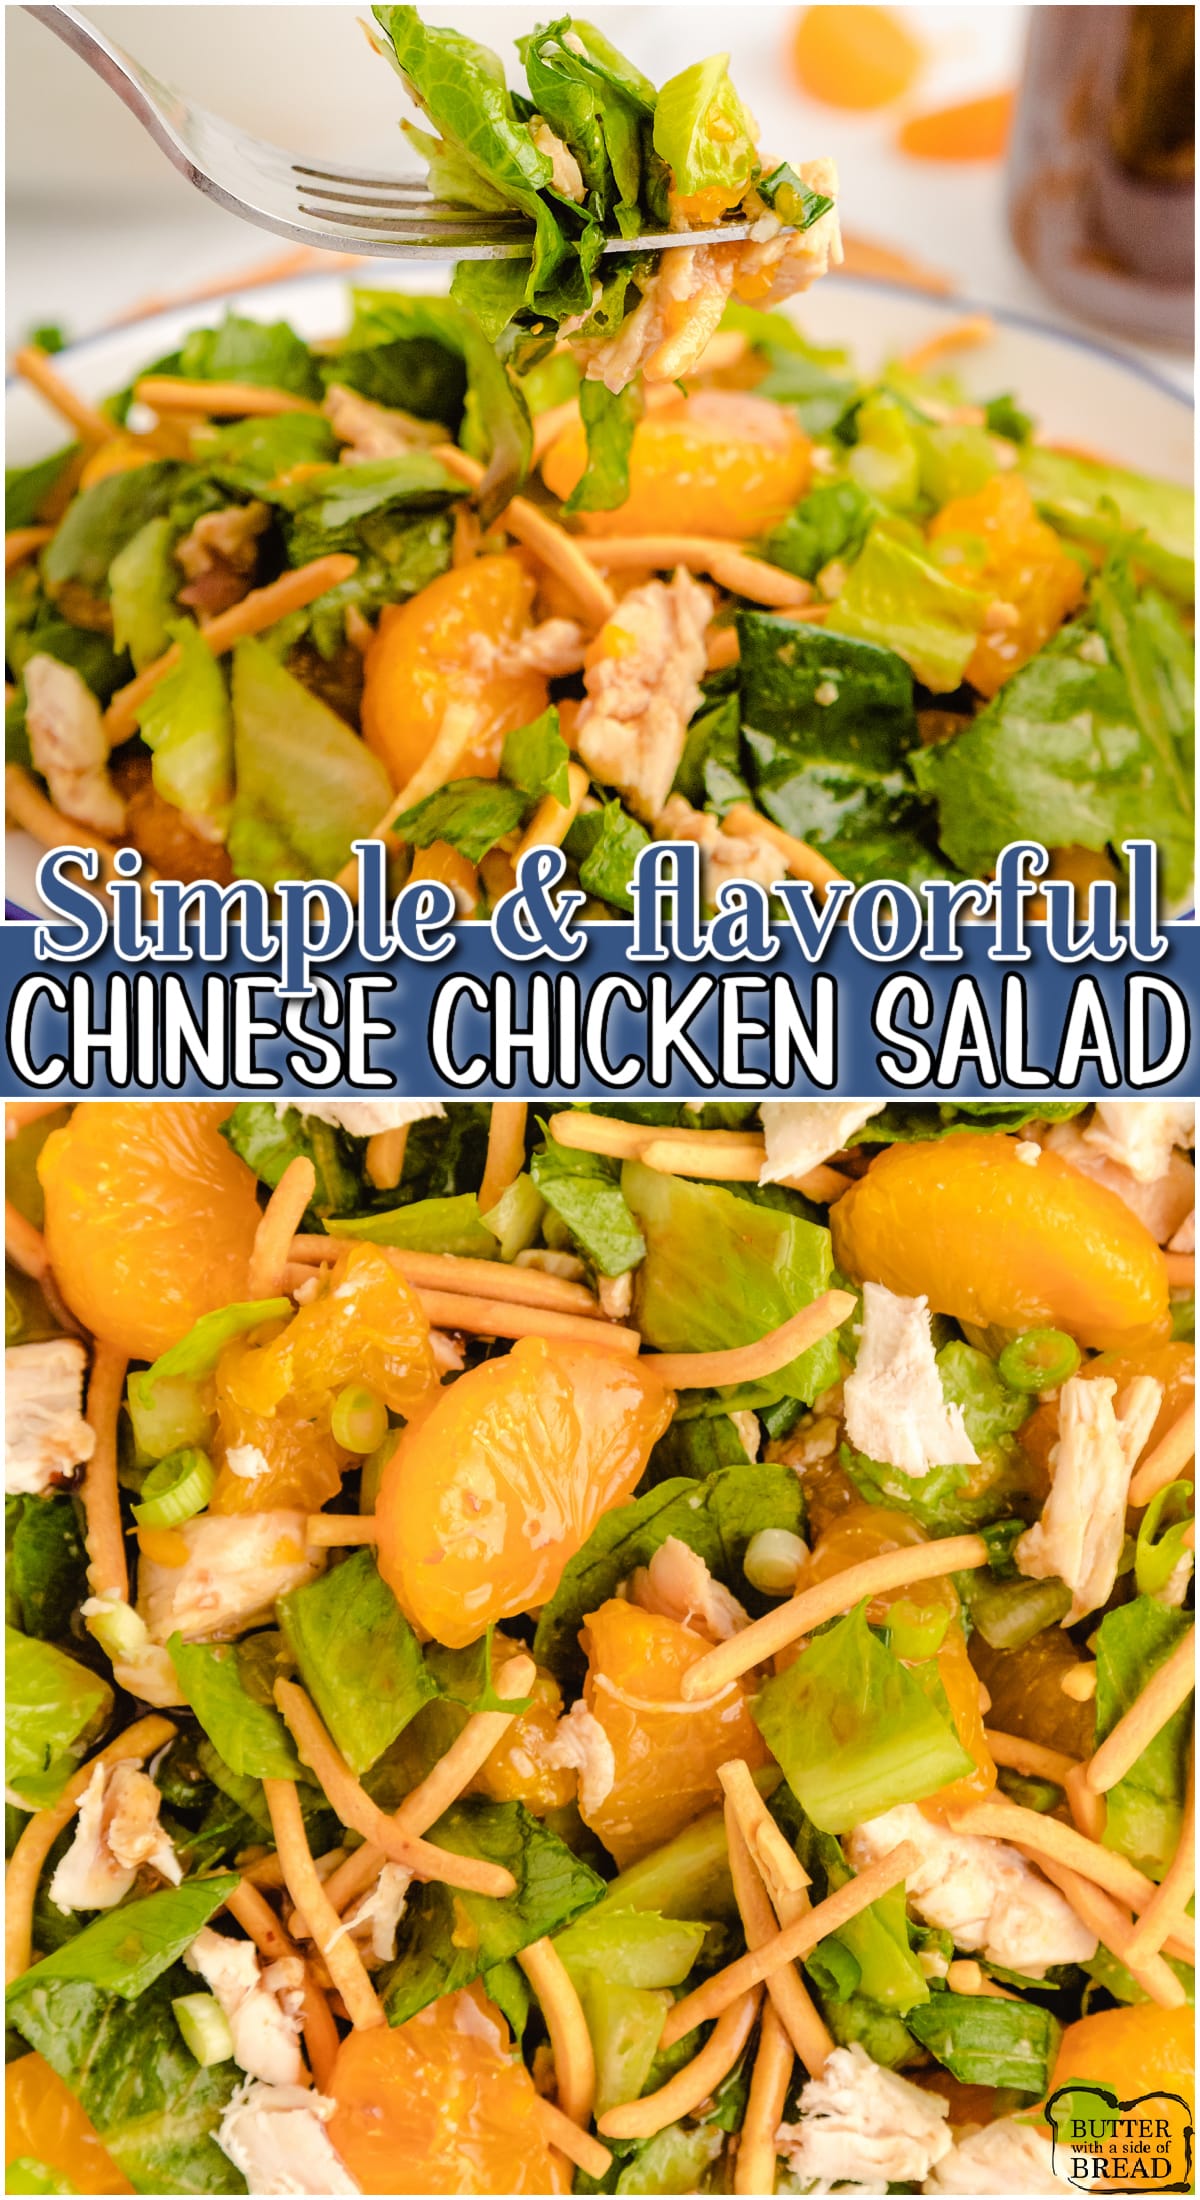 Chinese Chicken Salad is a light, flavorful salad made with grilled chicken, oranges, crunchy chow mein noodles, lettuce & topped with sesame dressing. It's a fantastic summer dinner!